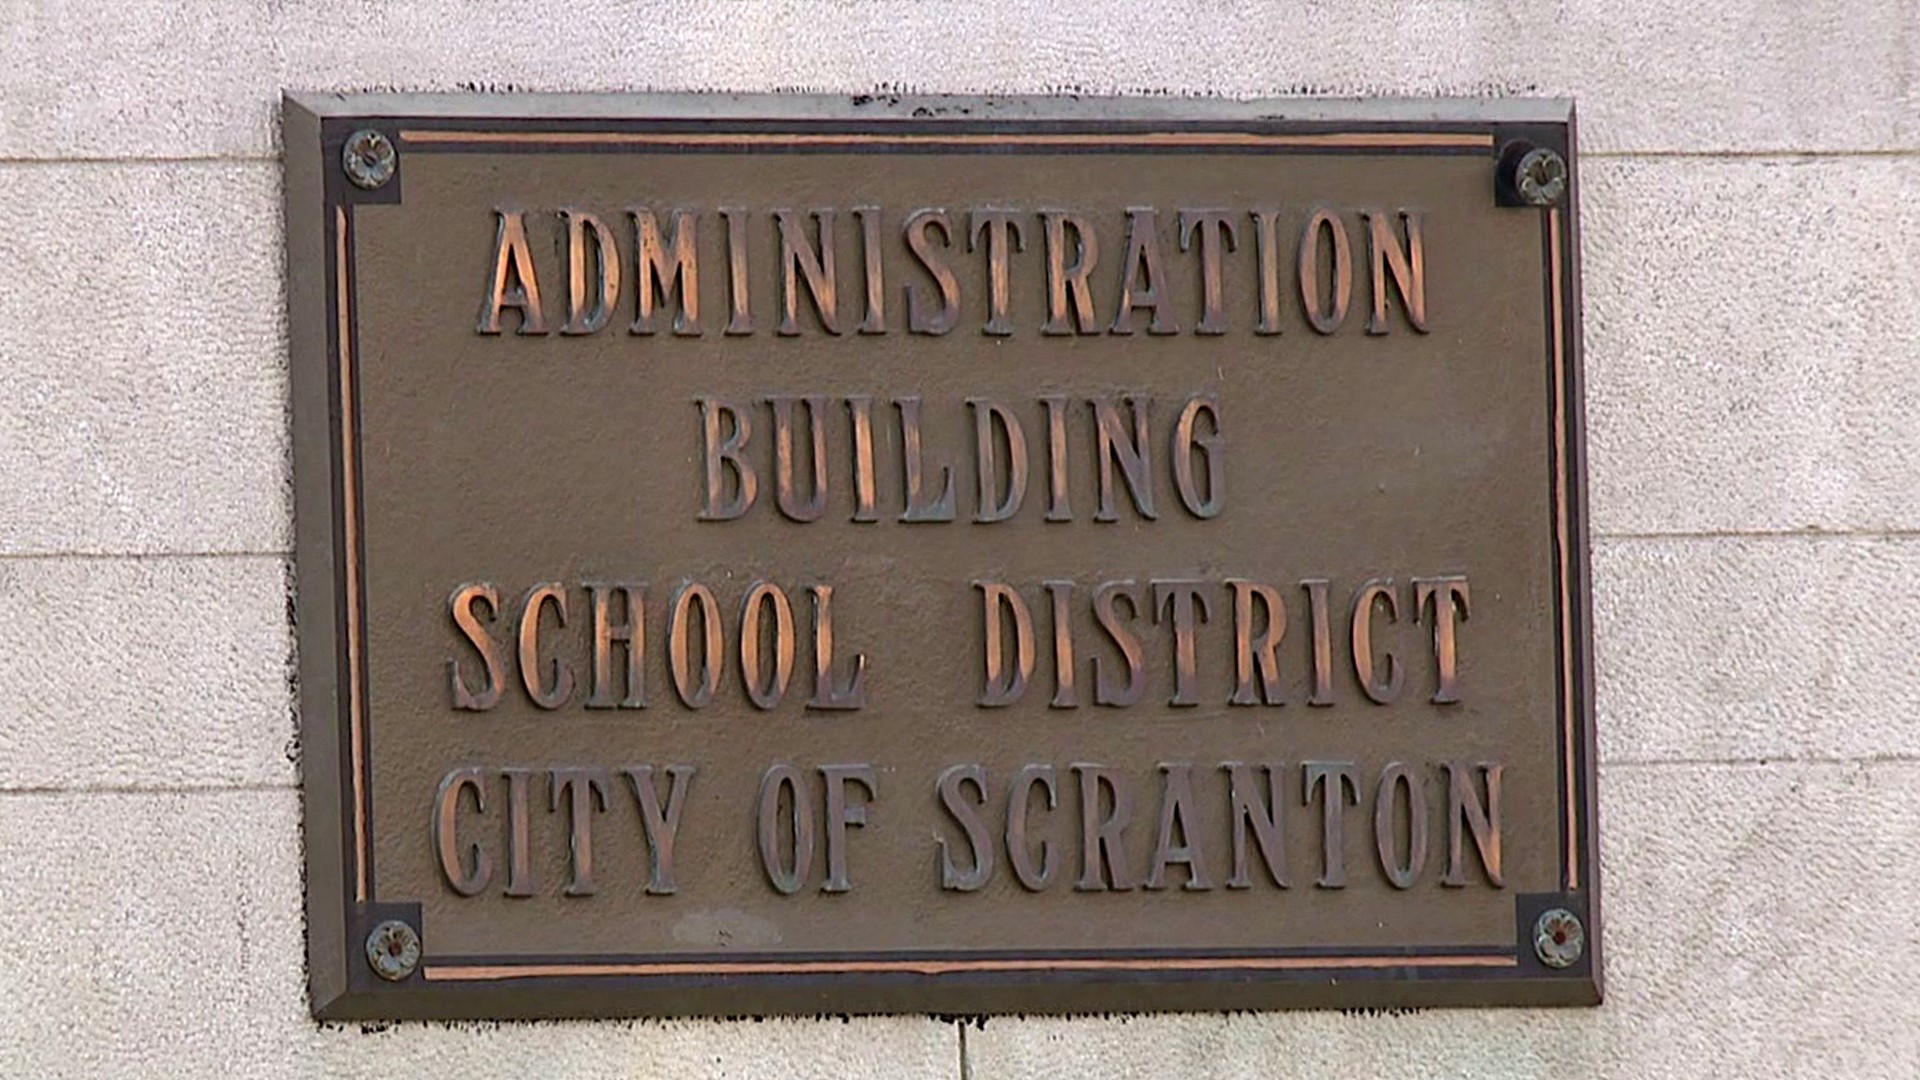 The Scranton School District is planning two informational meetings Thursday night.